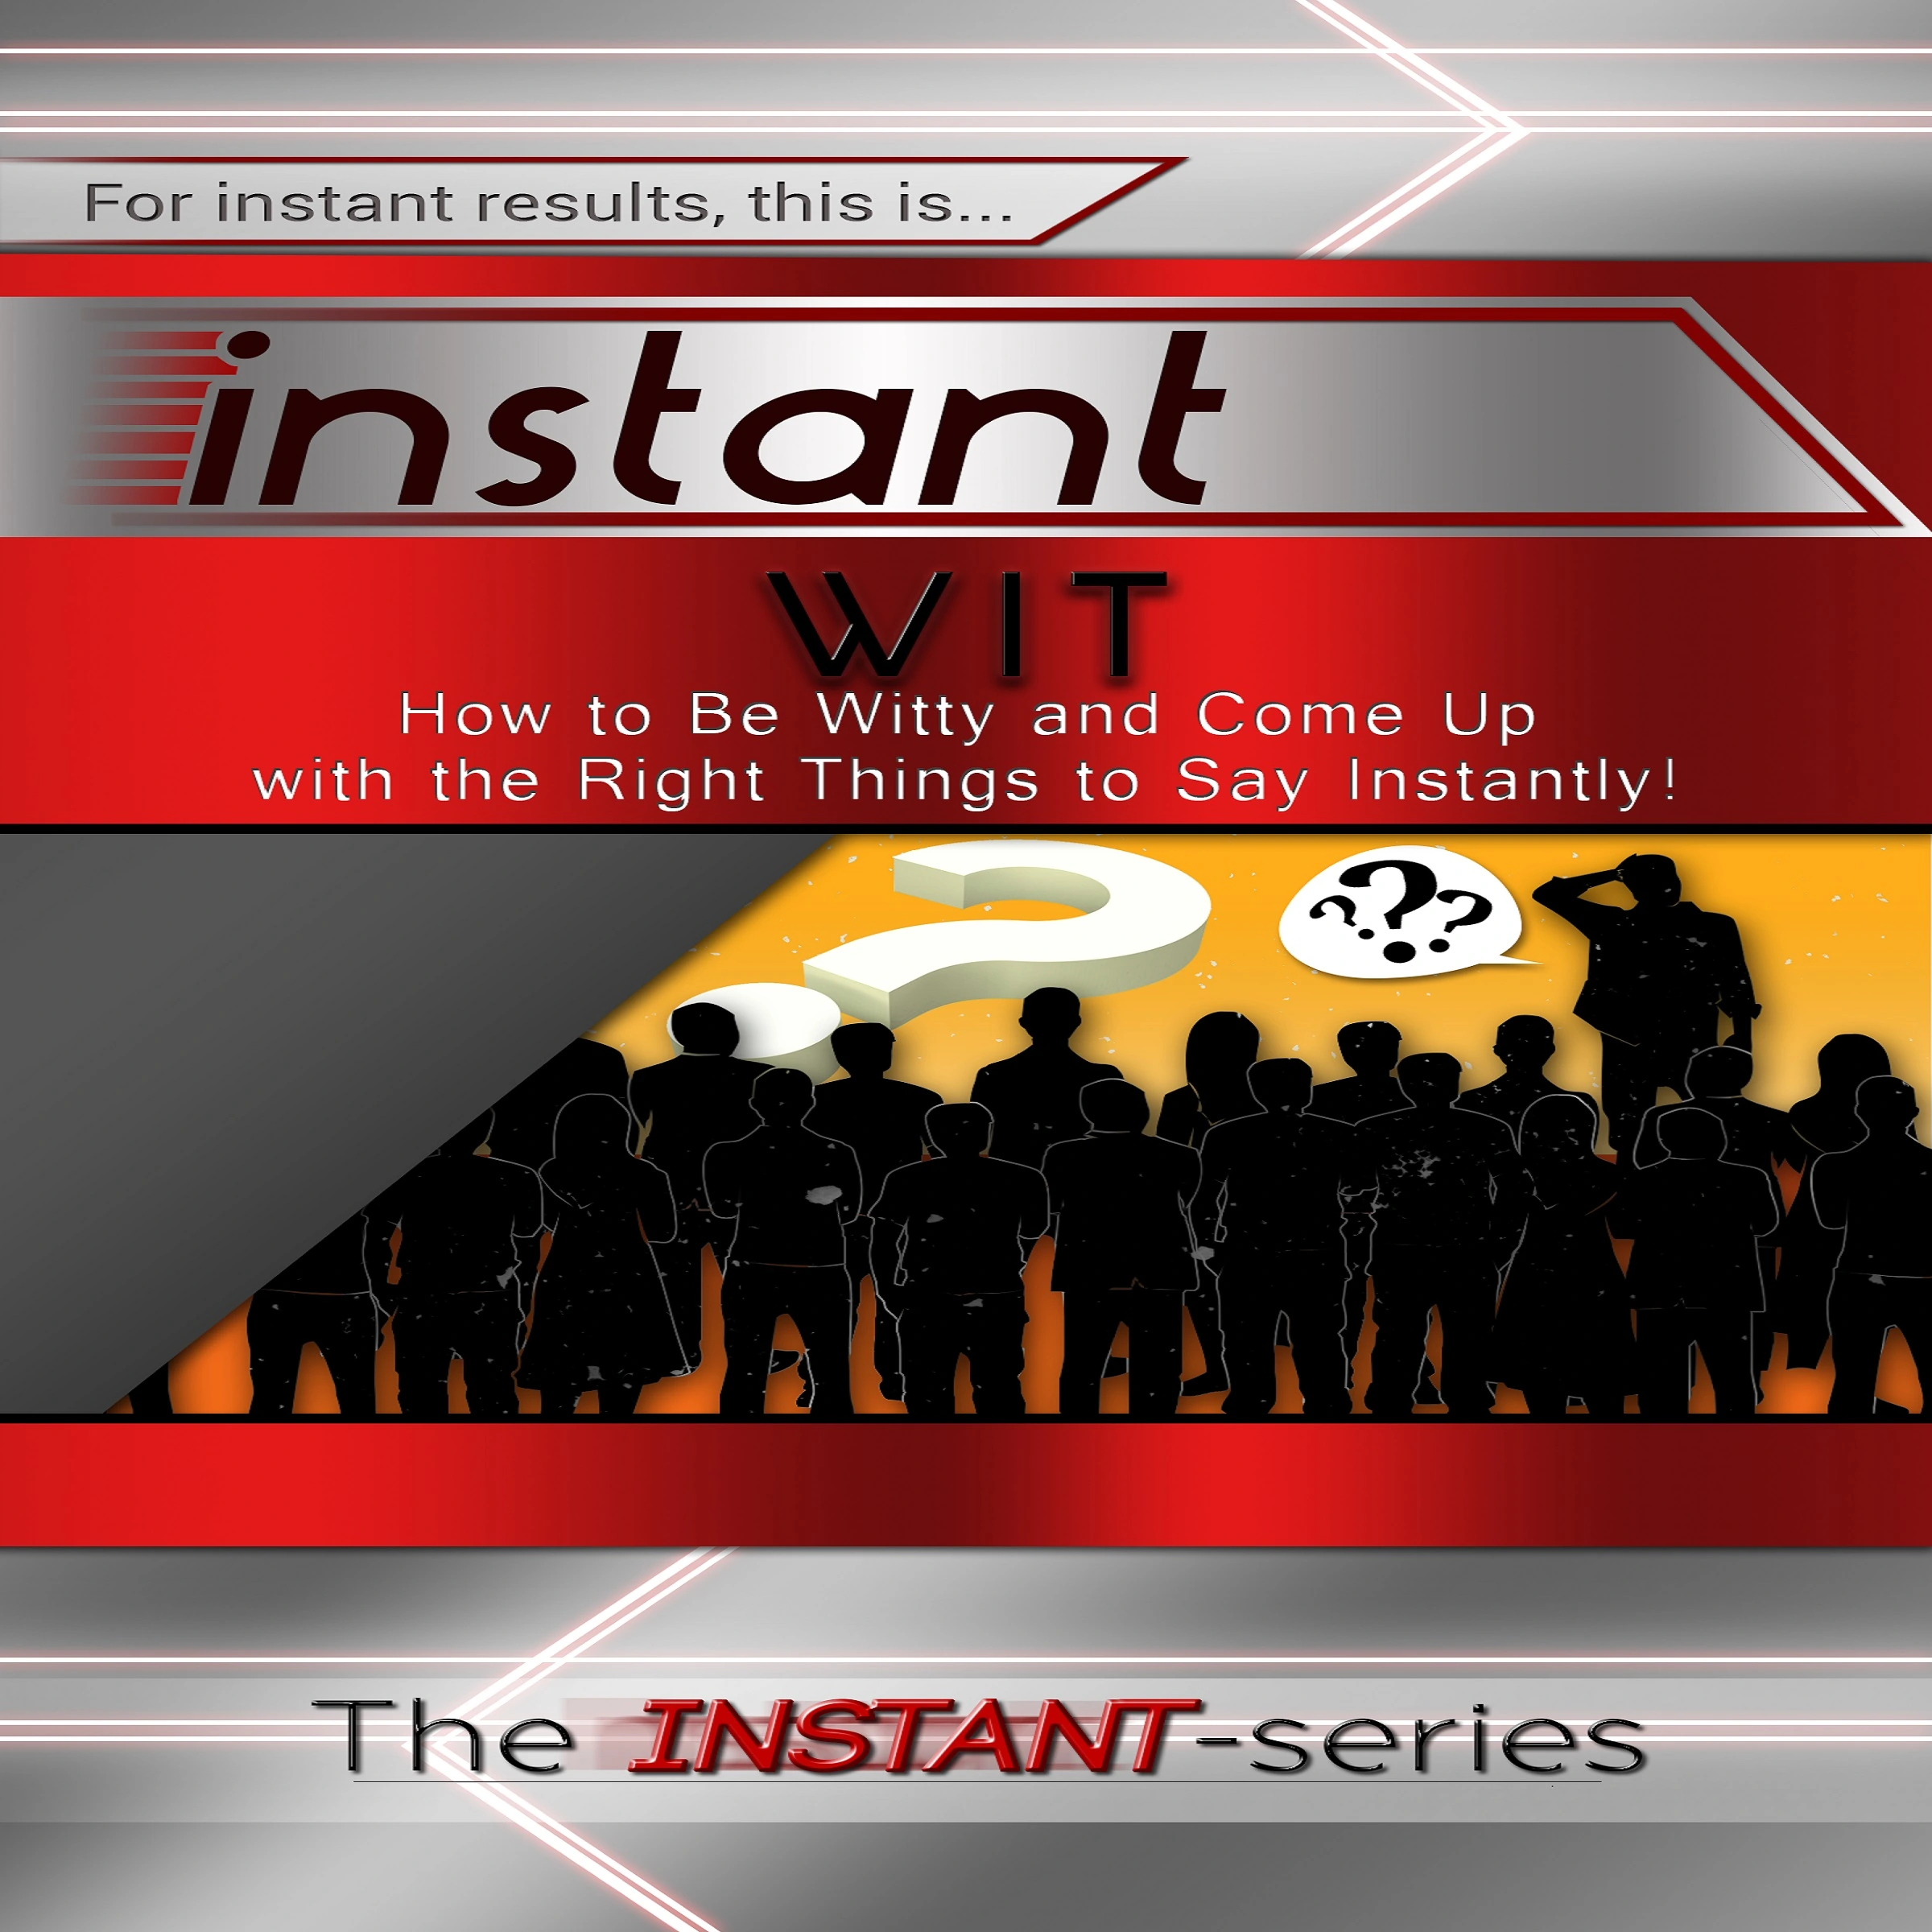 Instant Wit Audiobook by The INSTANT-Series